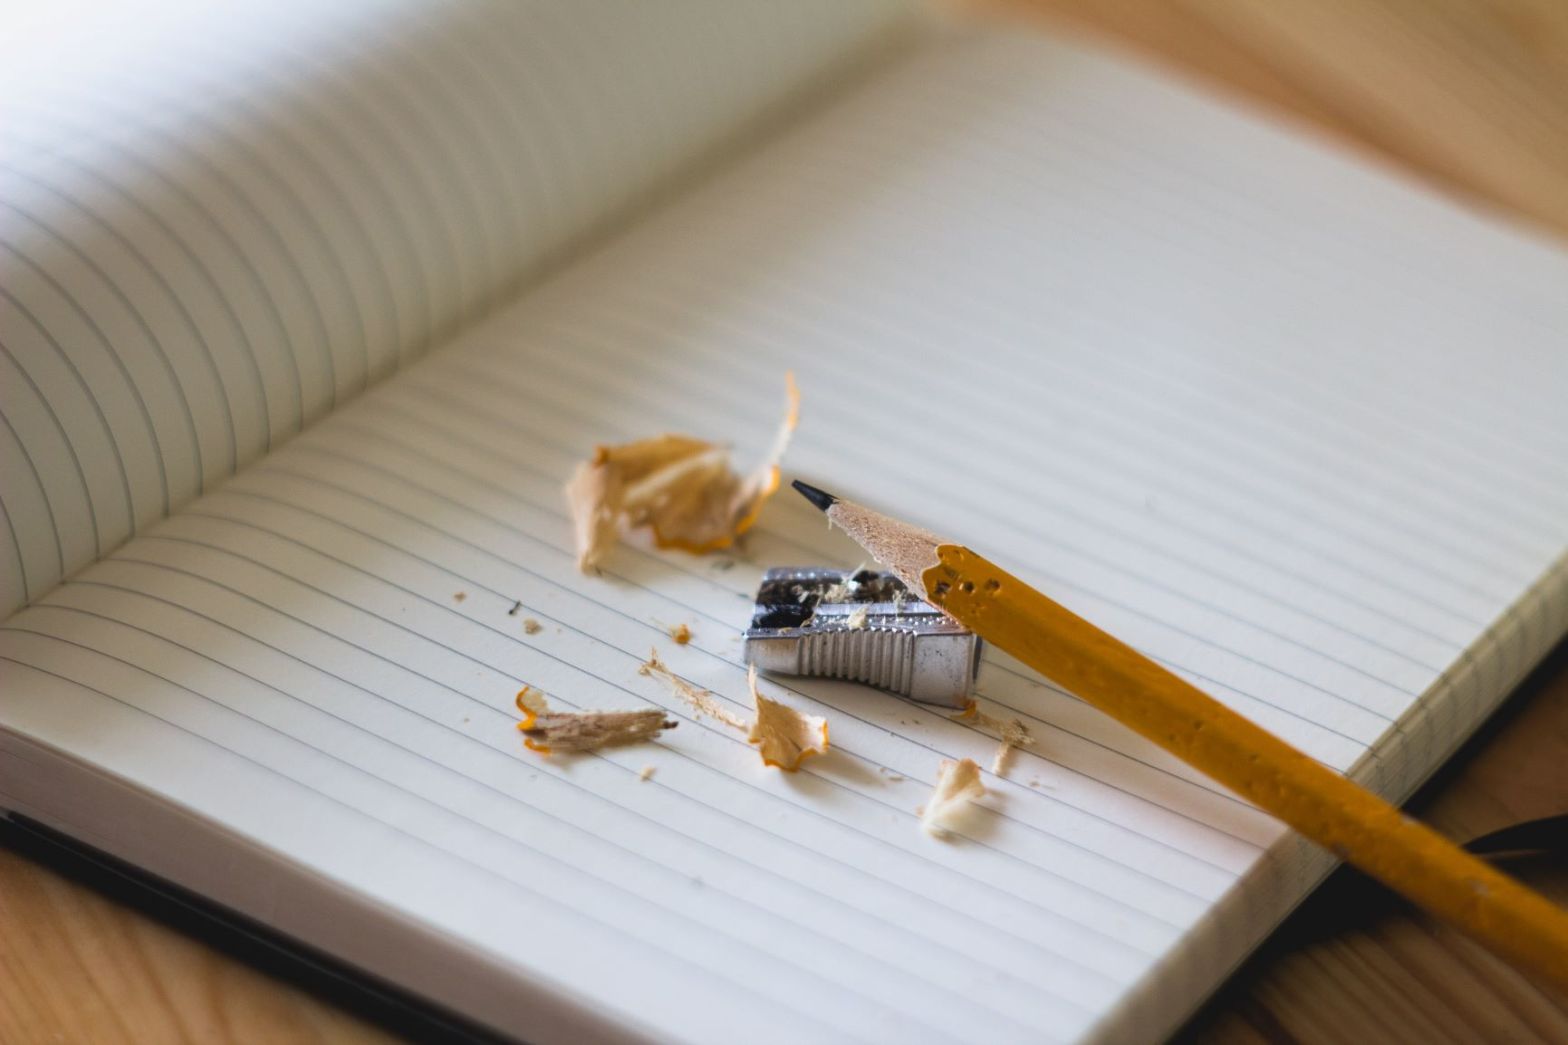 Blank notebook with newly sharpened pencil, sharpener and shavings